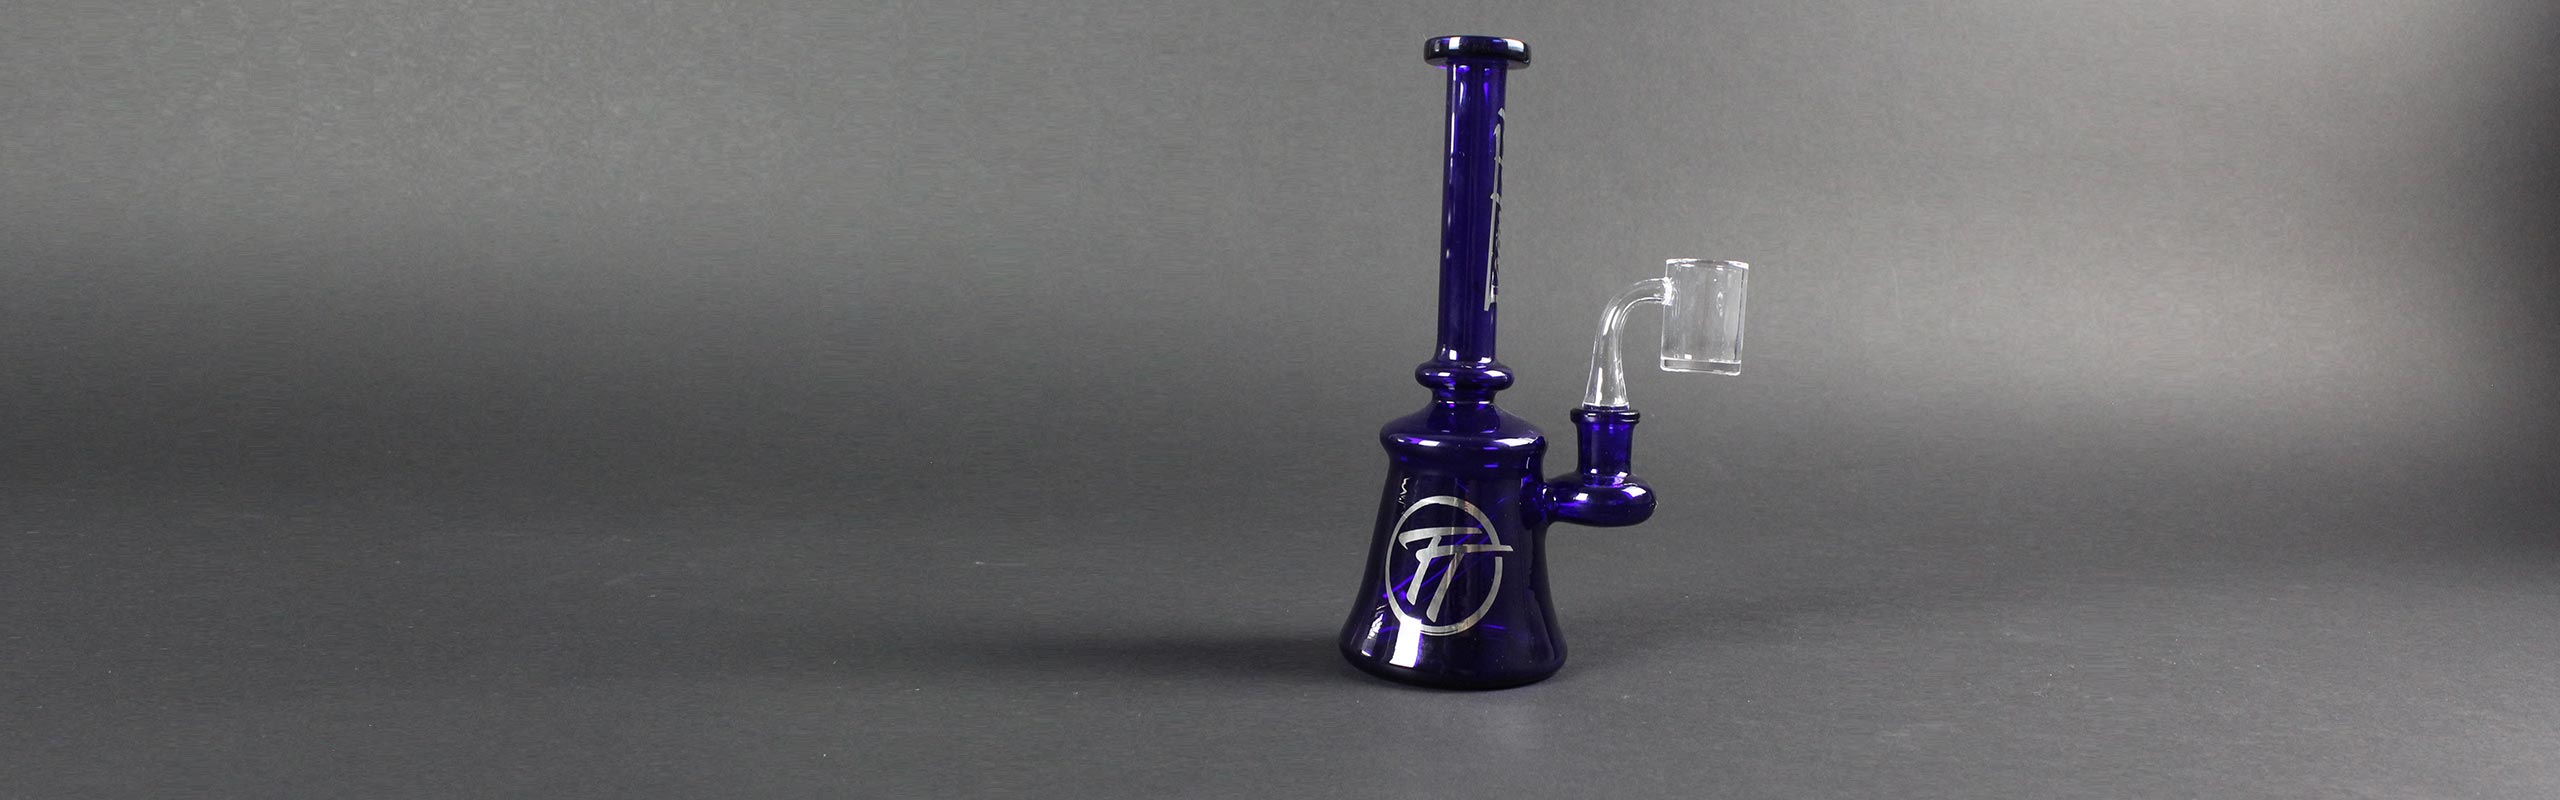 How To Smoke Dabs Without A Rig?